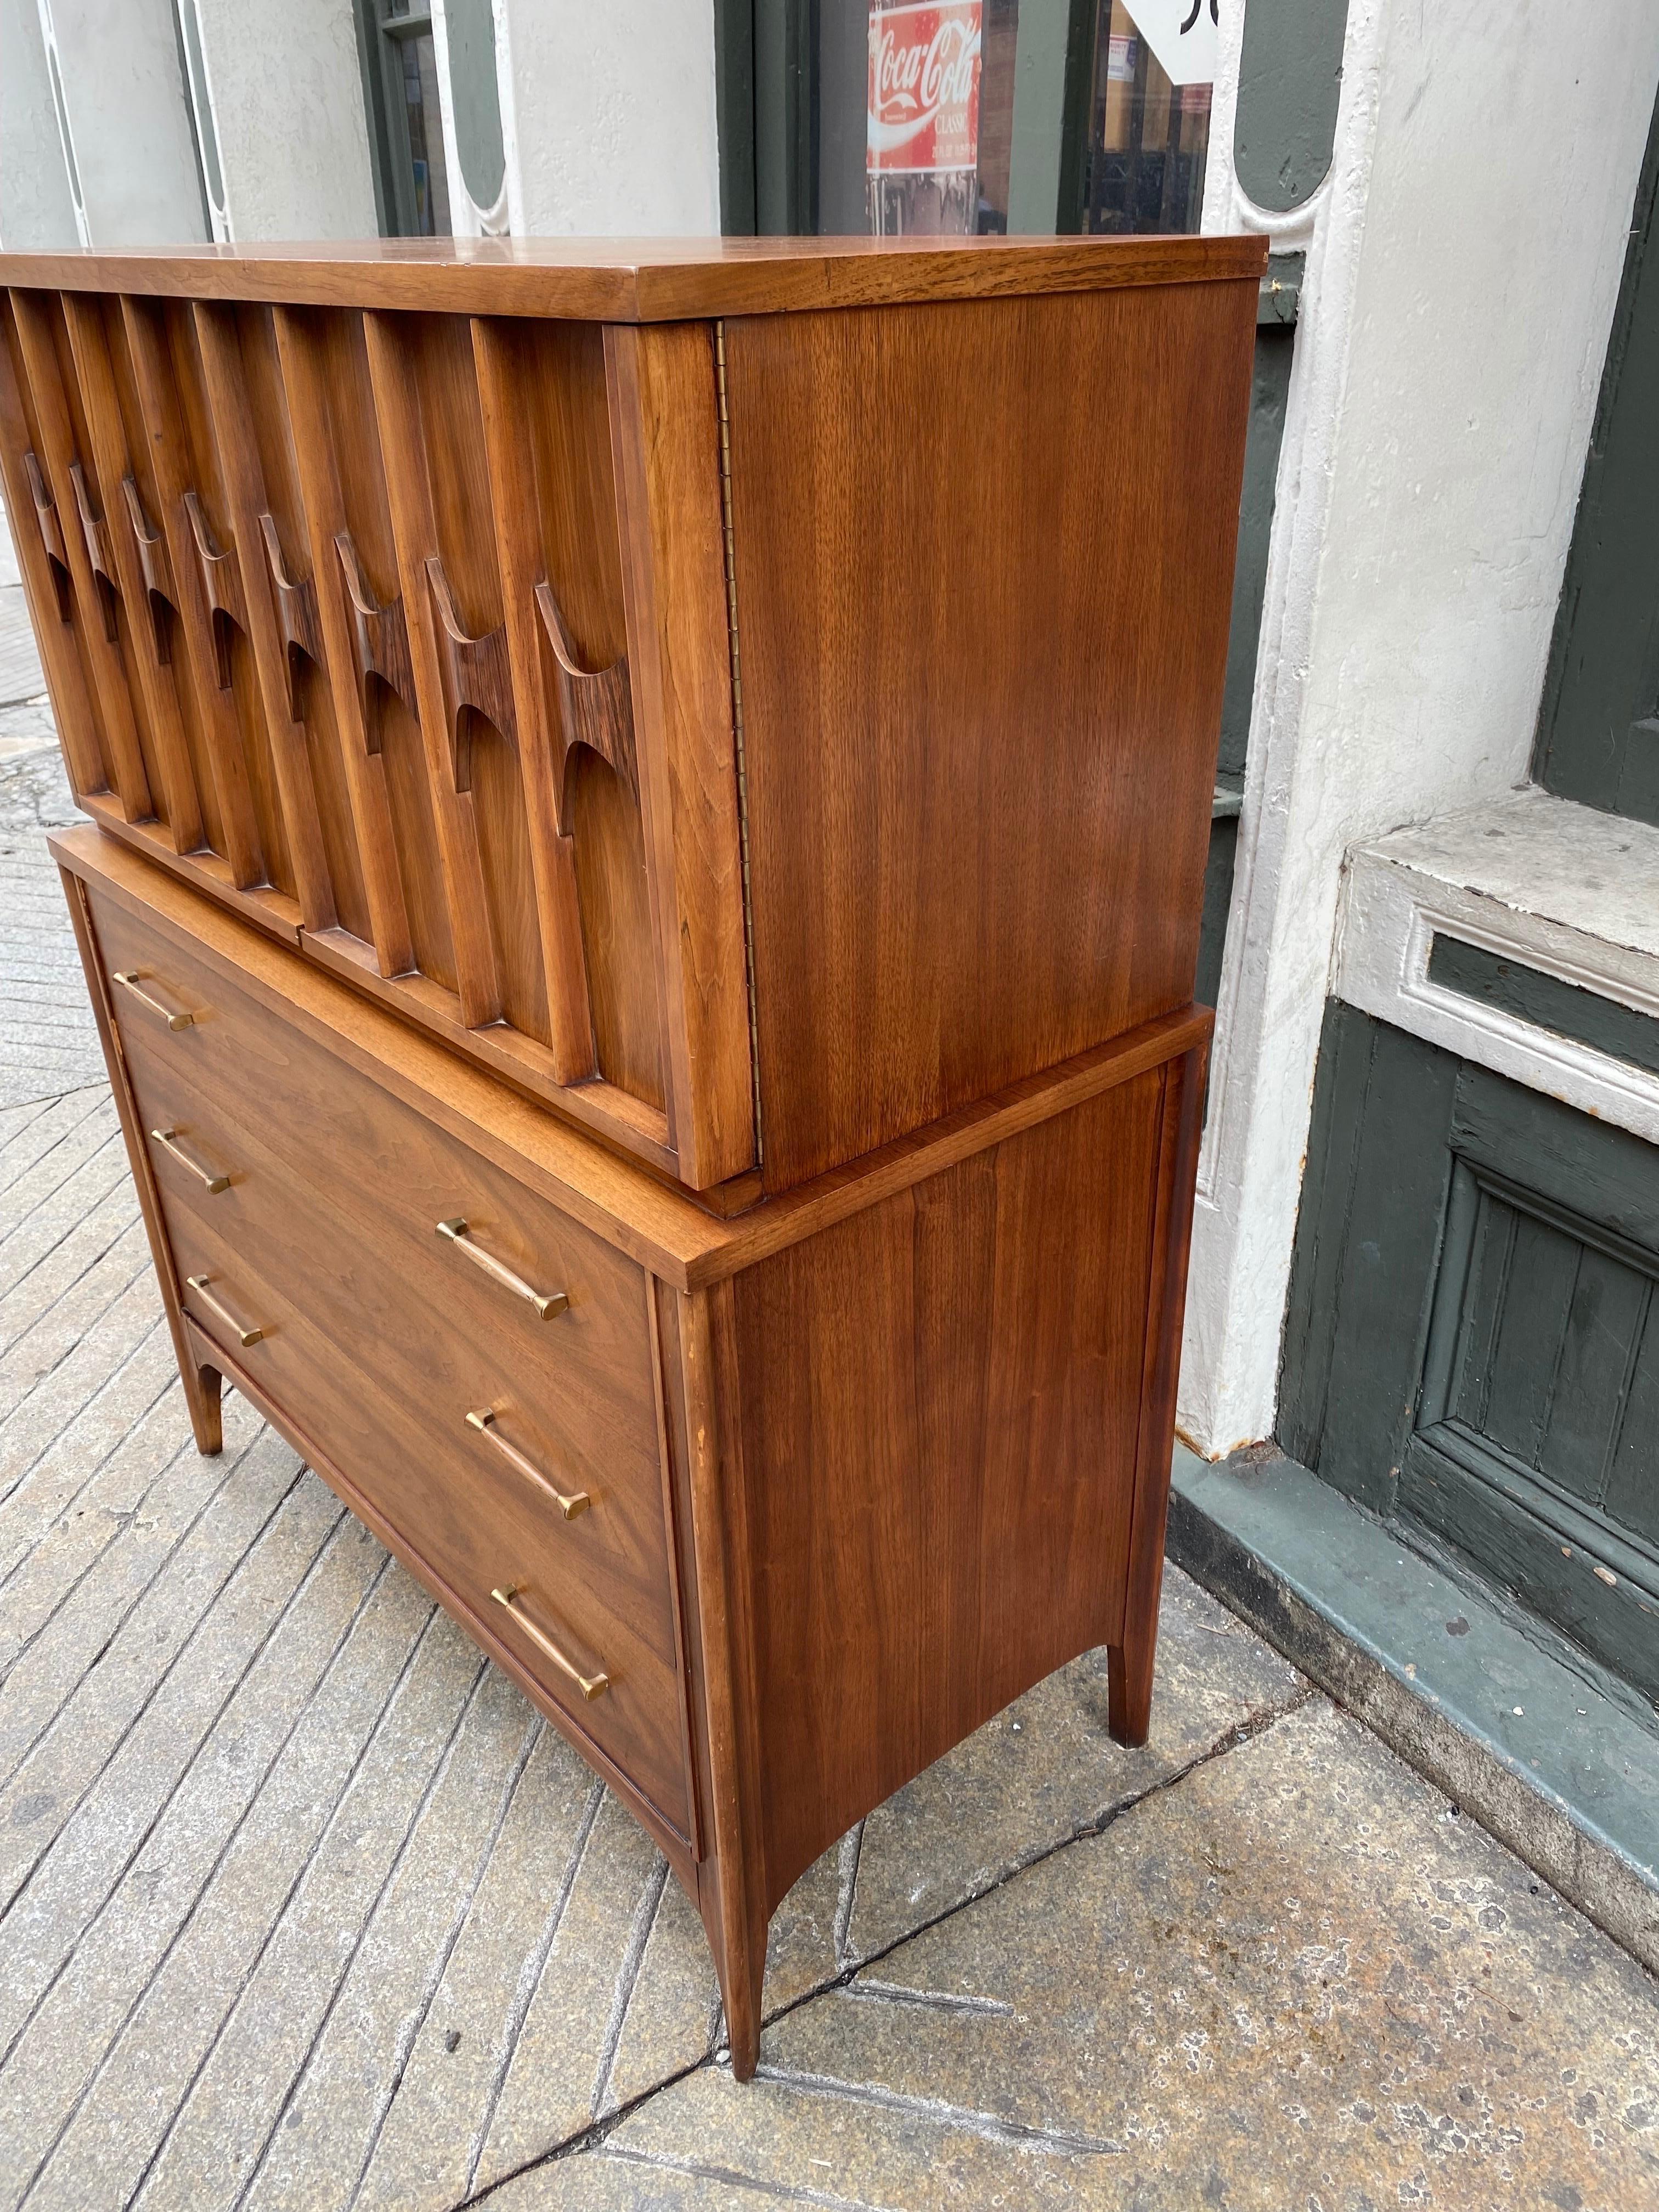 Kent Coffey armoire/ highboy. Tons of storage in this dresser! 3 Pull out drawers to bottom with 2 doors that swing open to reveal shelf area on the left and 2 pull out drawers on the right. Cabinet is accented with Rosewood that acts as the handles